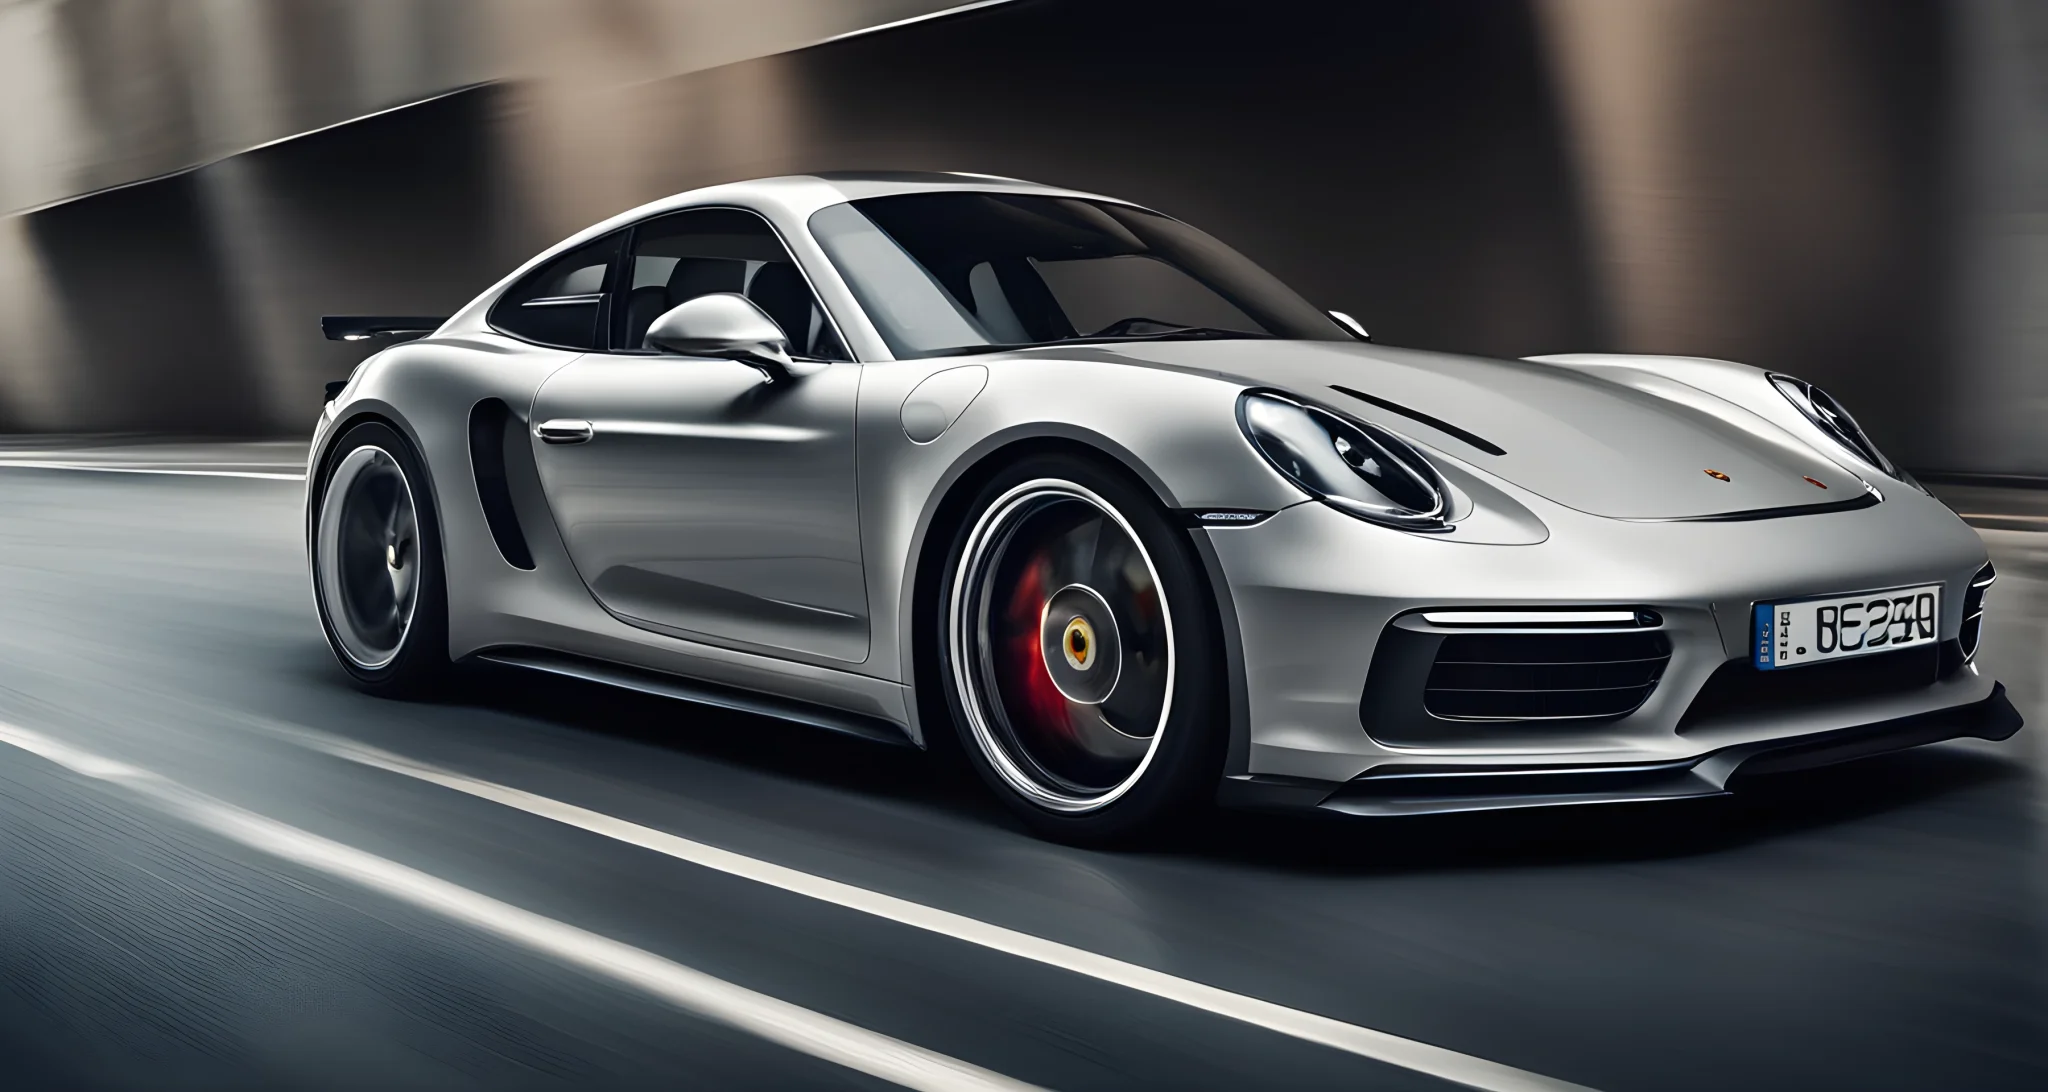 The image features a sleek and aerodynamic Porsche performance car, with a powerful engine and distinctive styling.